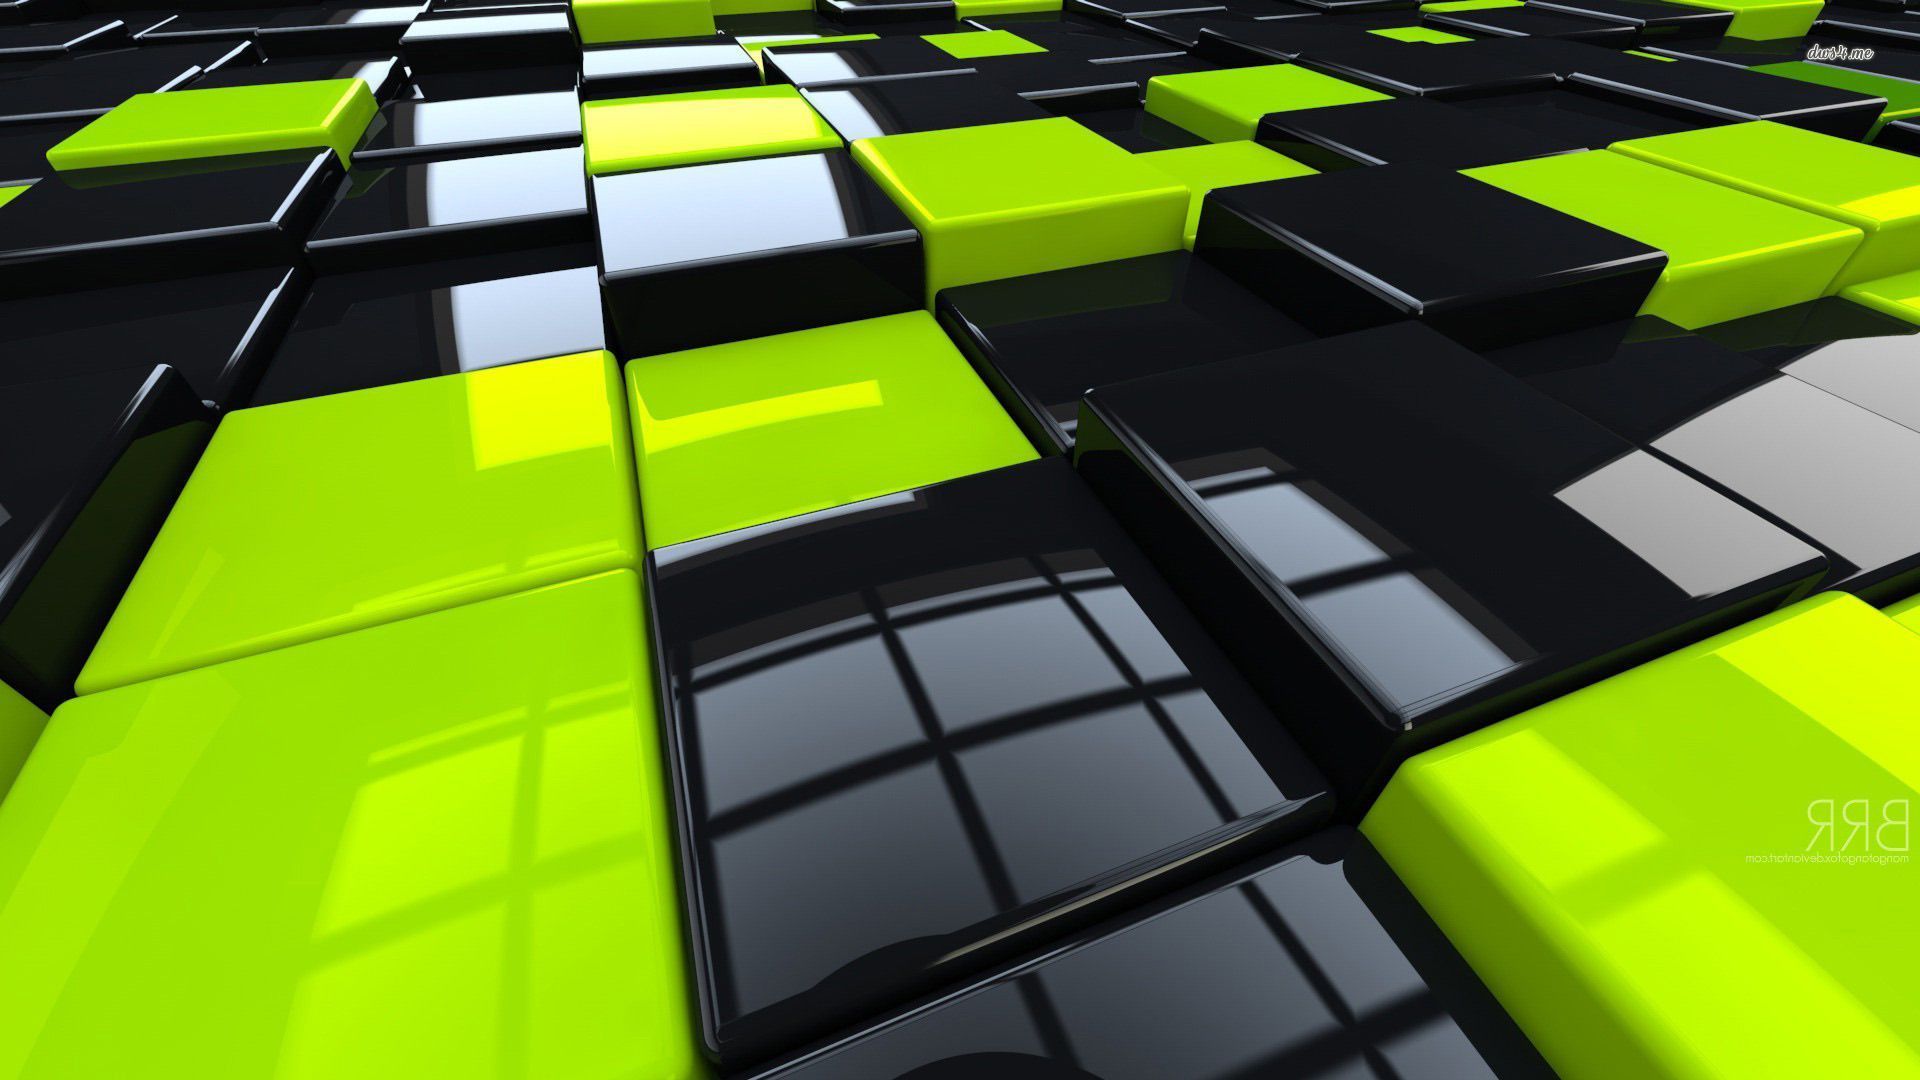 Black and yellow cubes wallpaper - 3D wallpapers - #11241